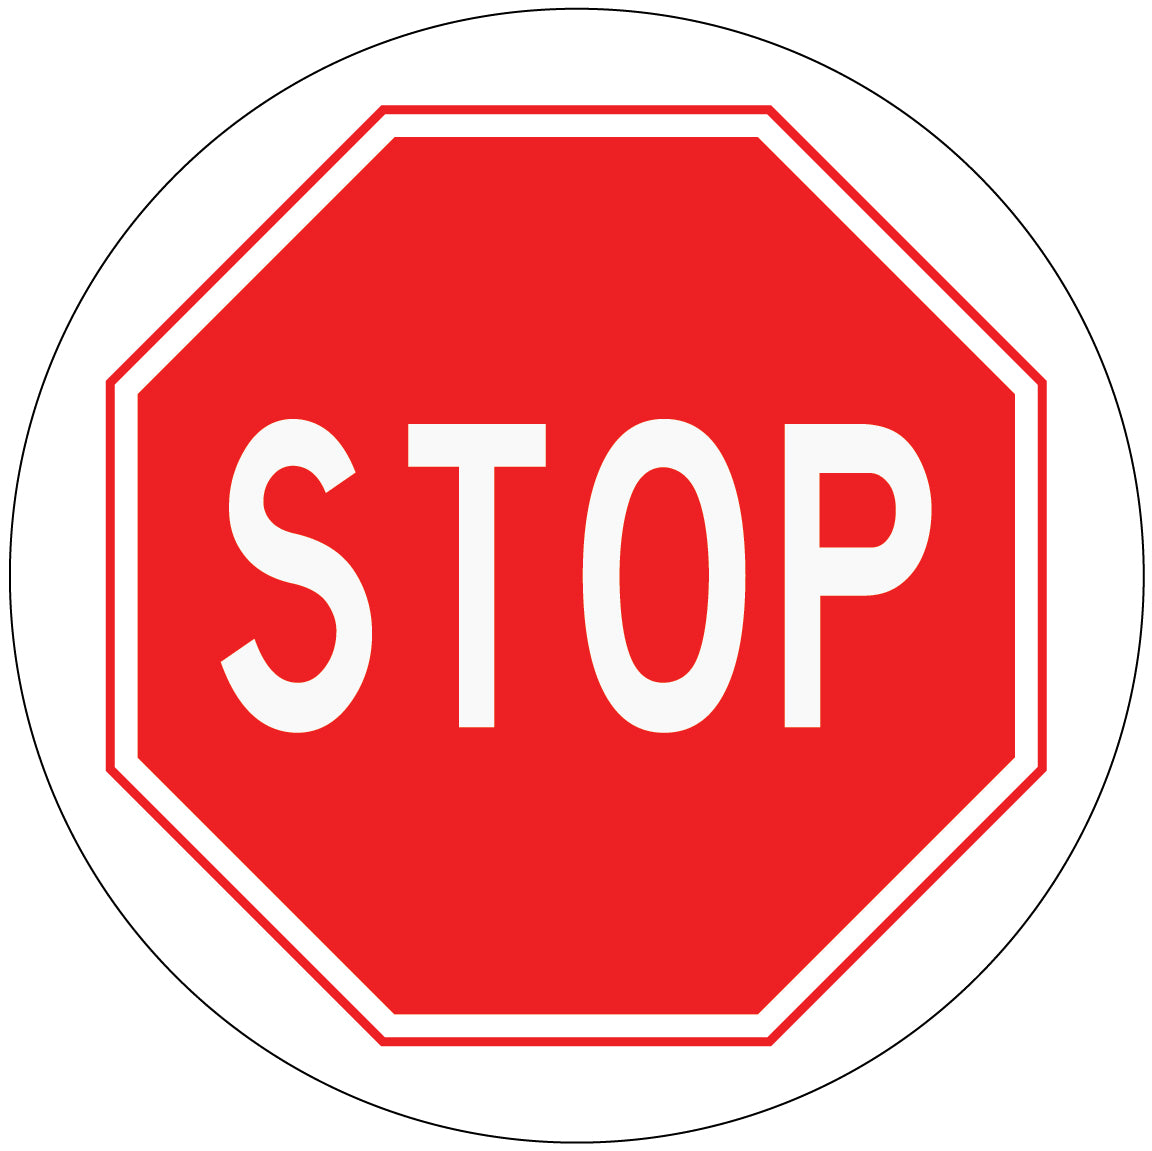 Stop Decal